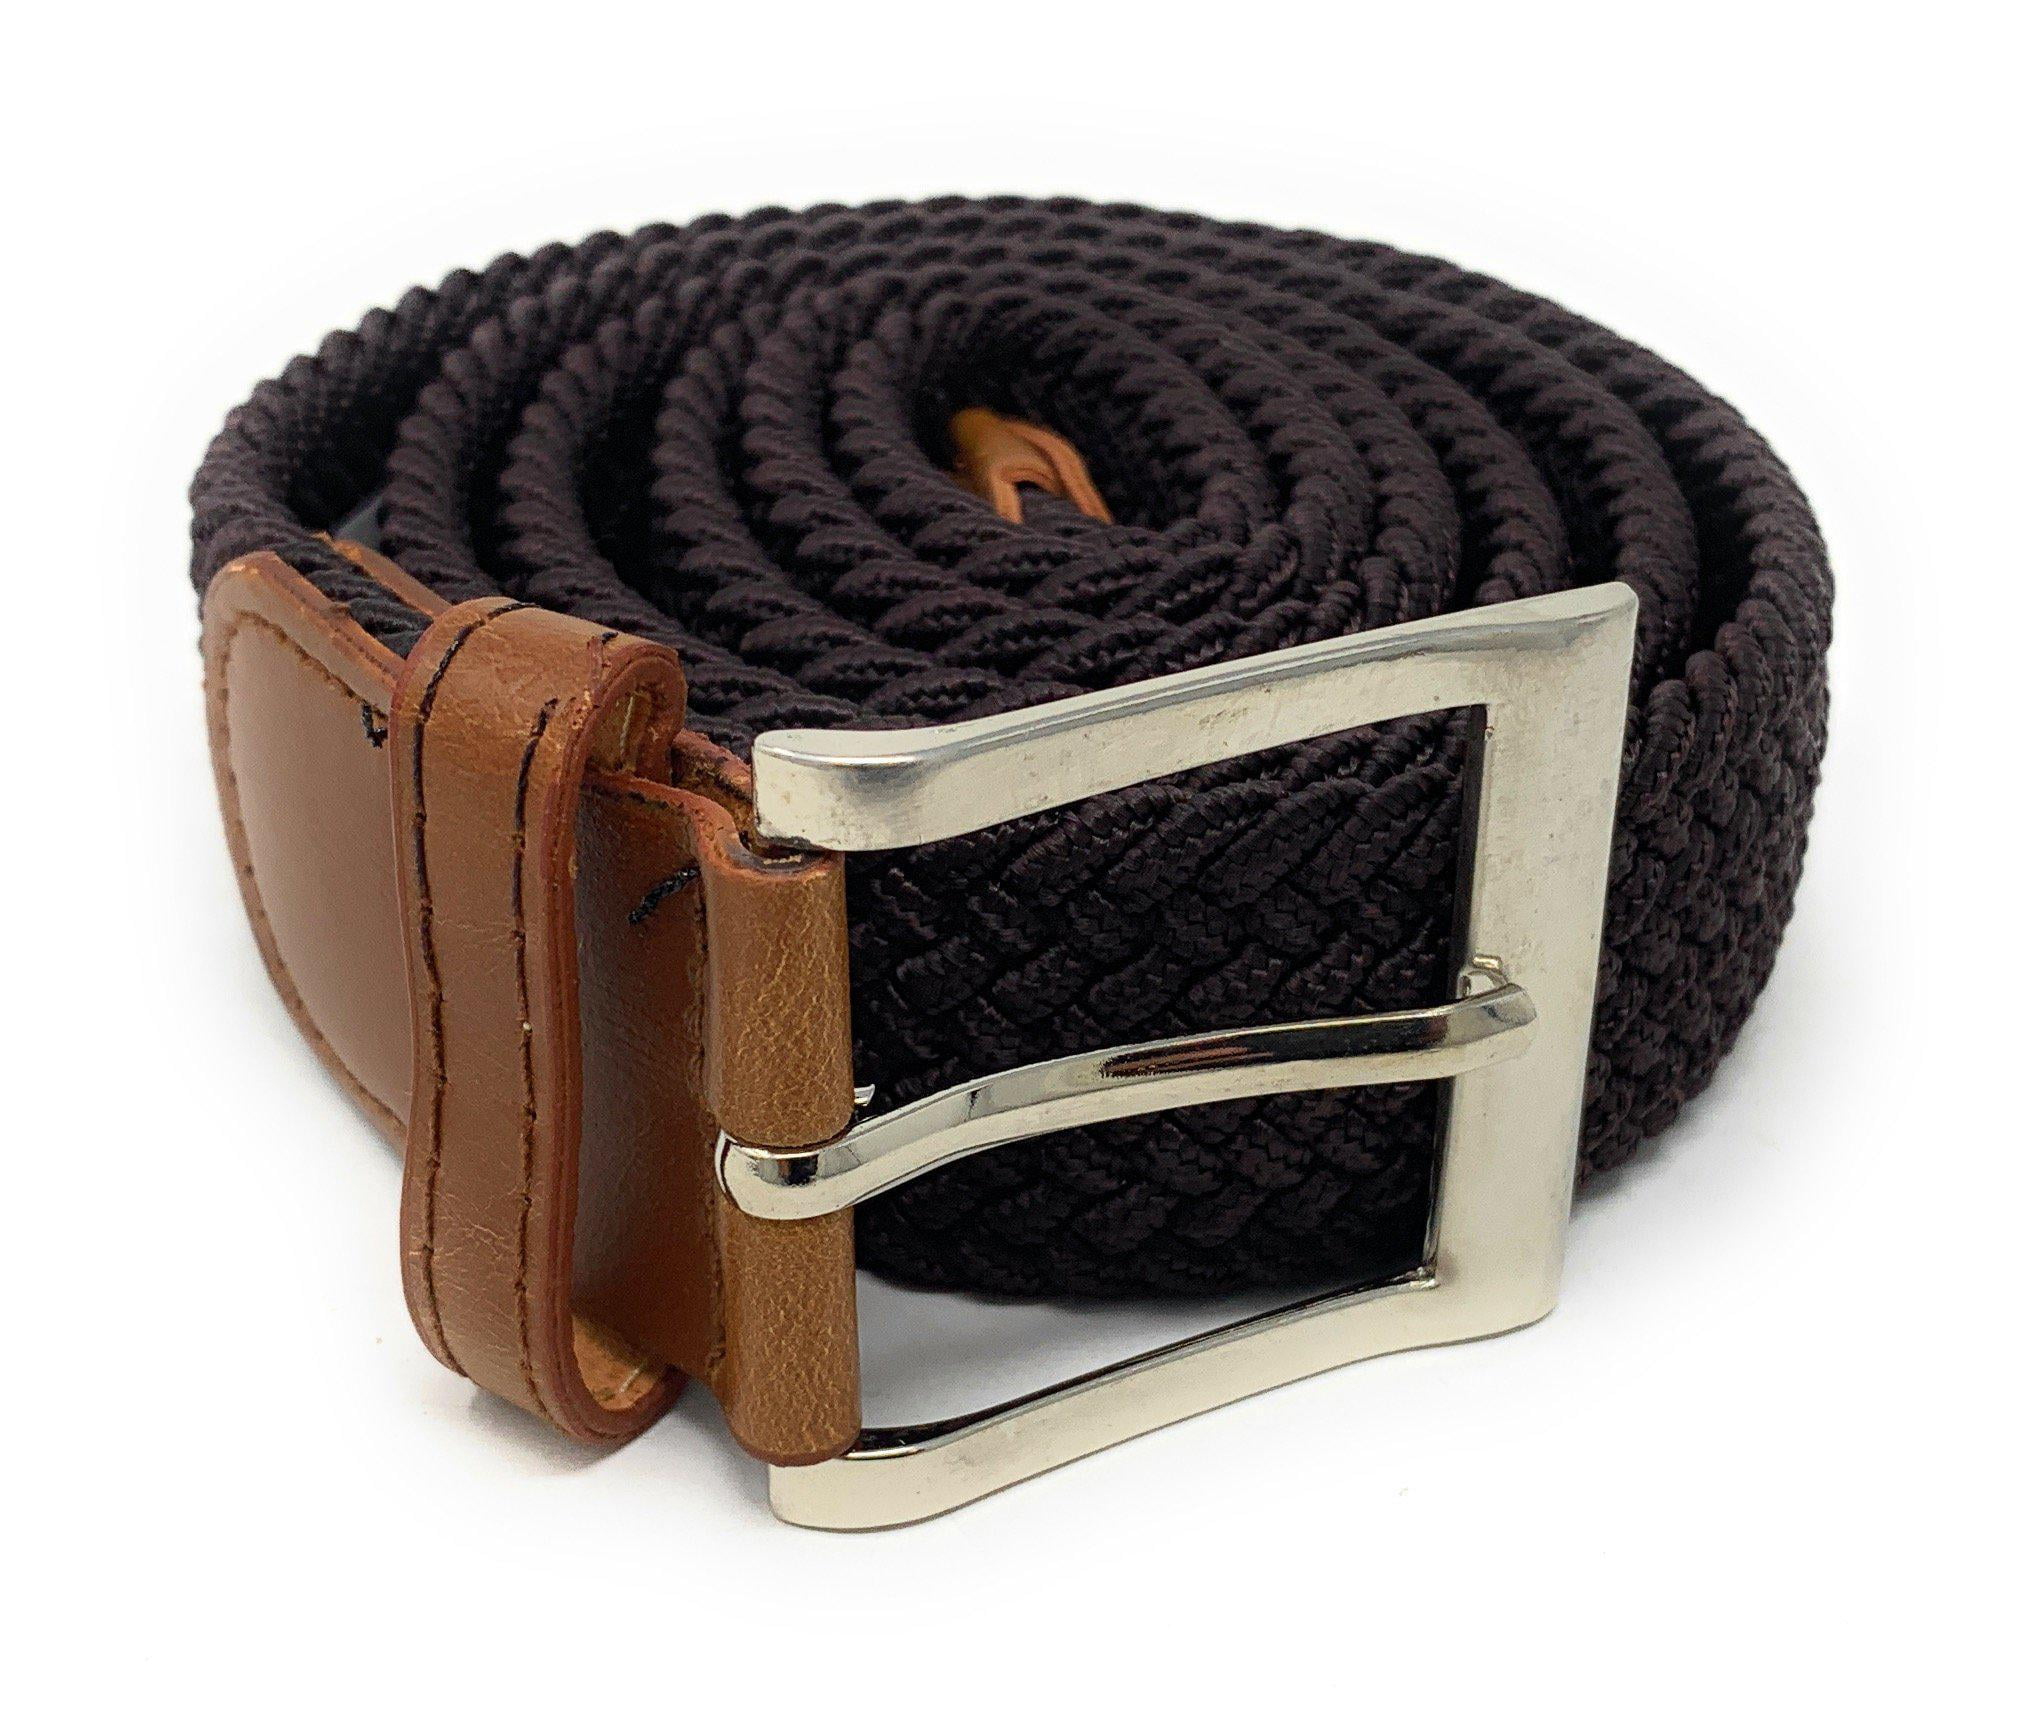 Mens webbing belts faux leather trim ladies elasticated woven braided stretch